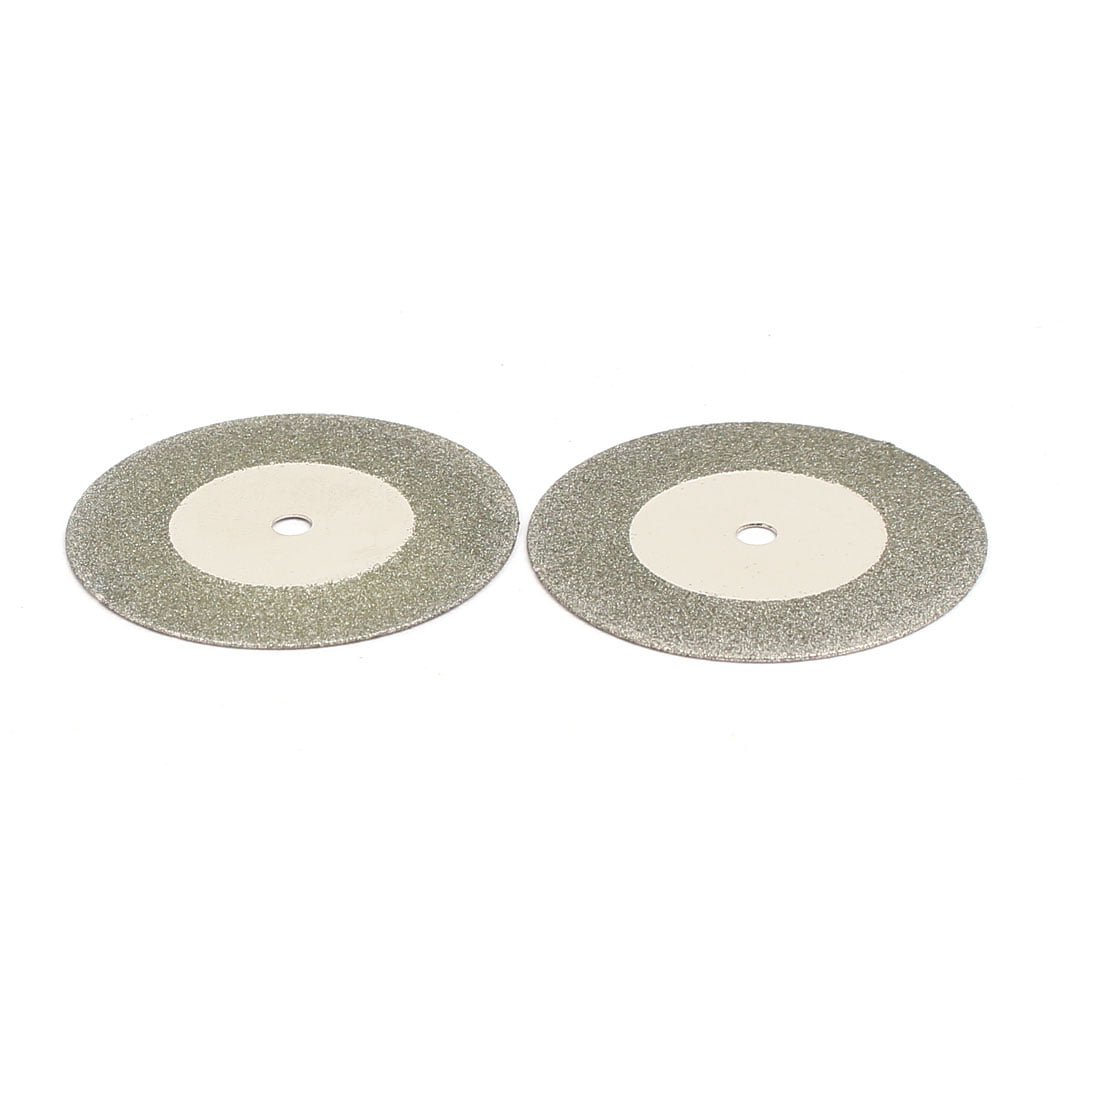 4" Diamond Cutting Wheels  Grinding Disc for Stone 120 Grits Silver Tone 2pcs 